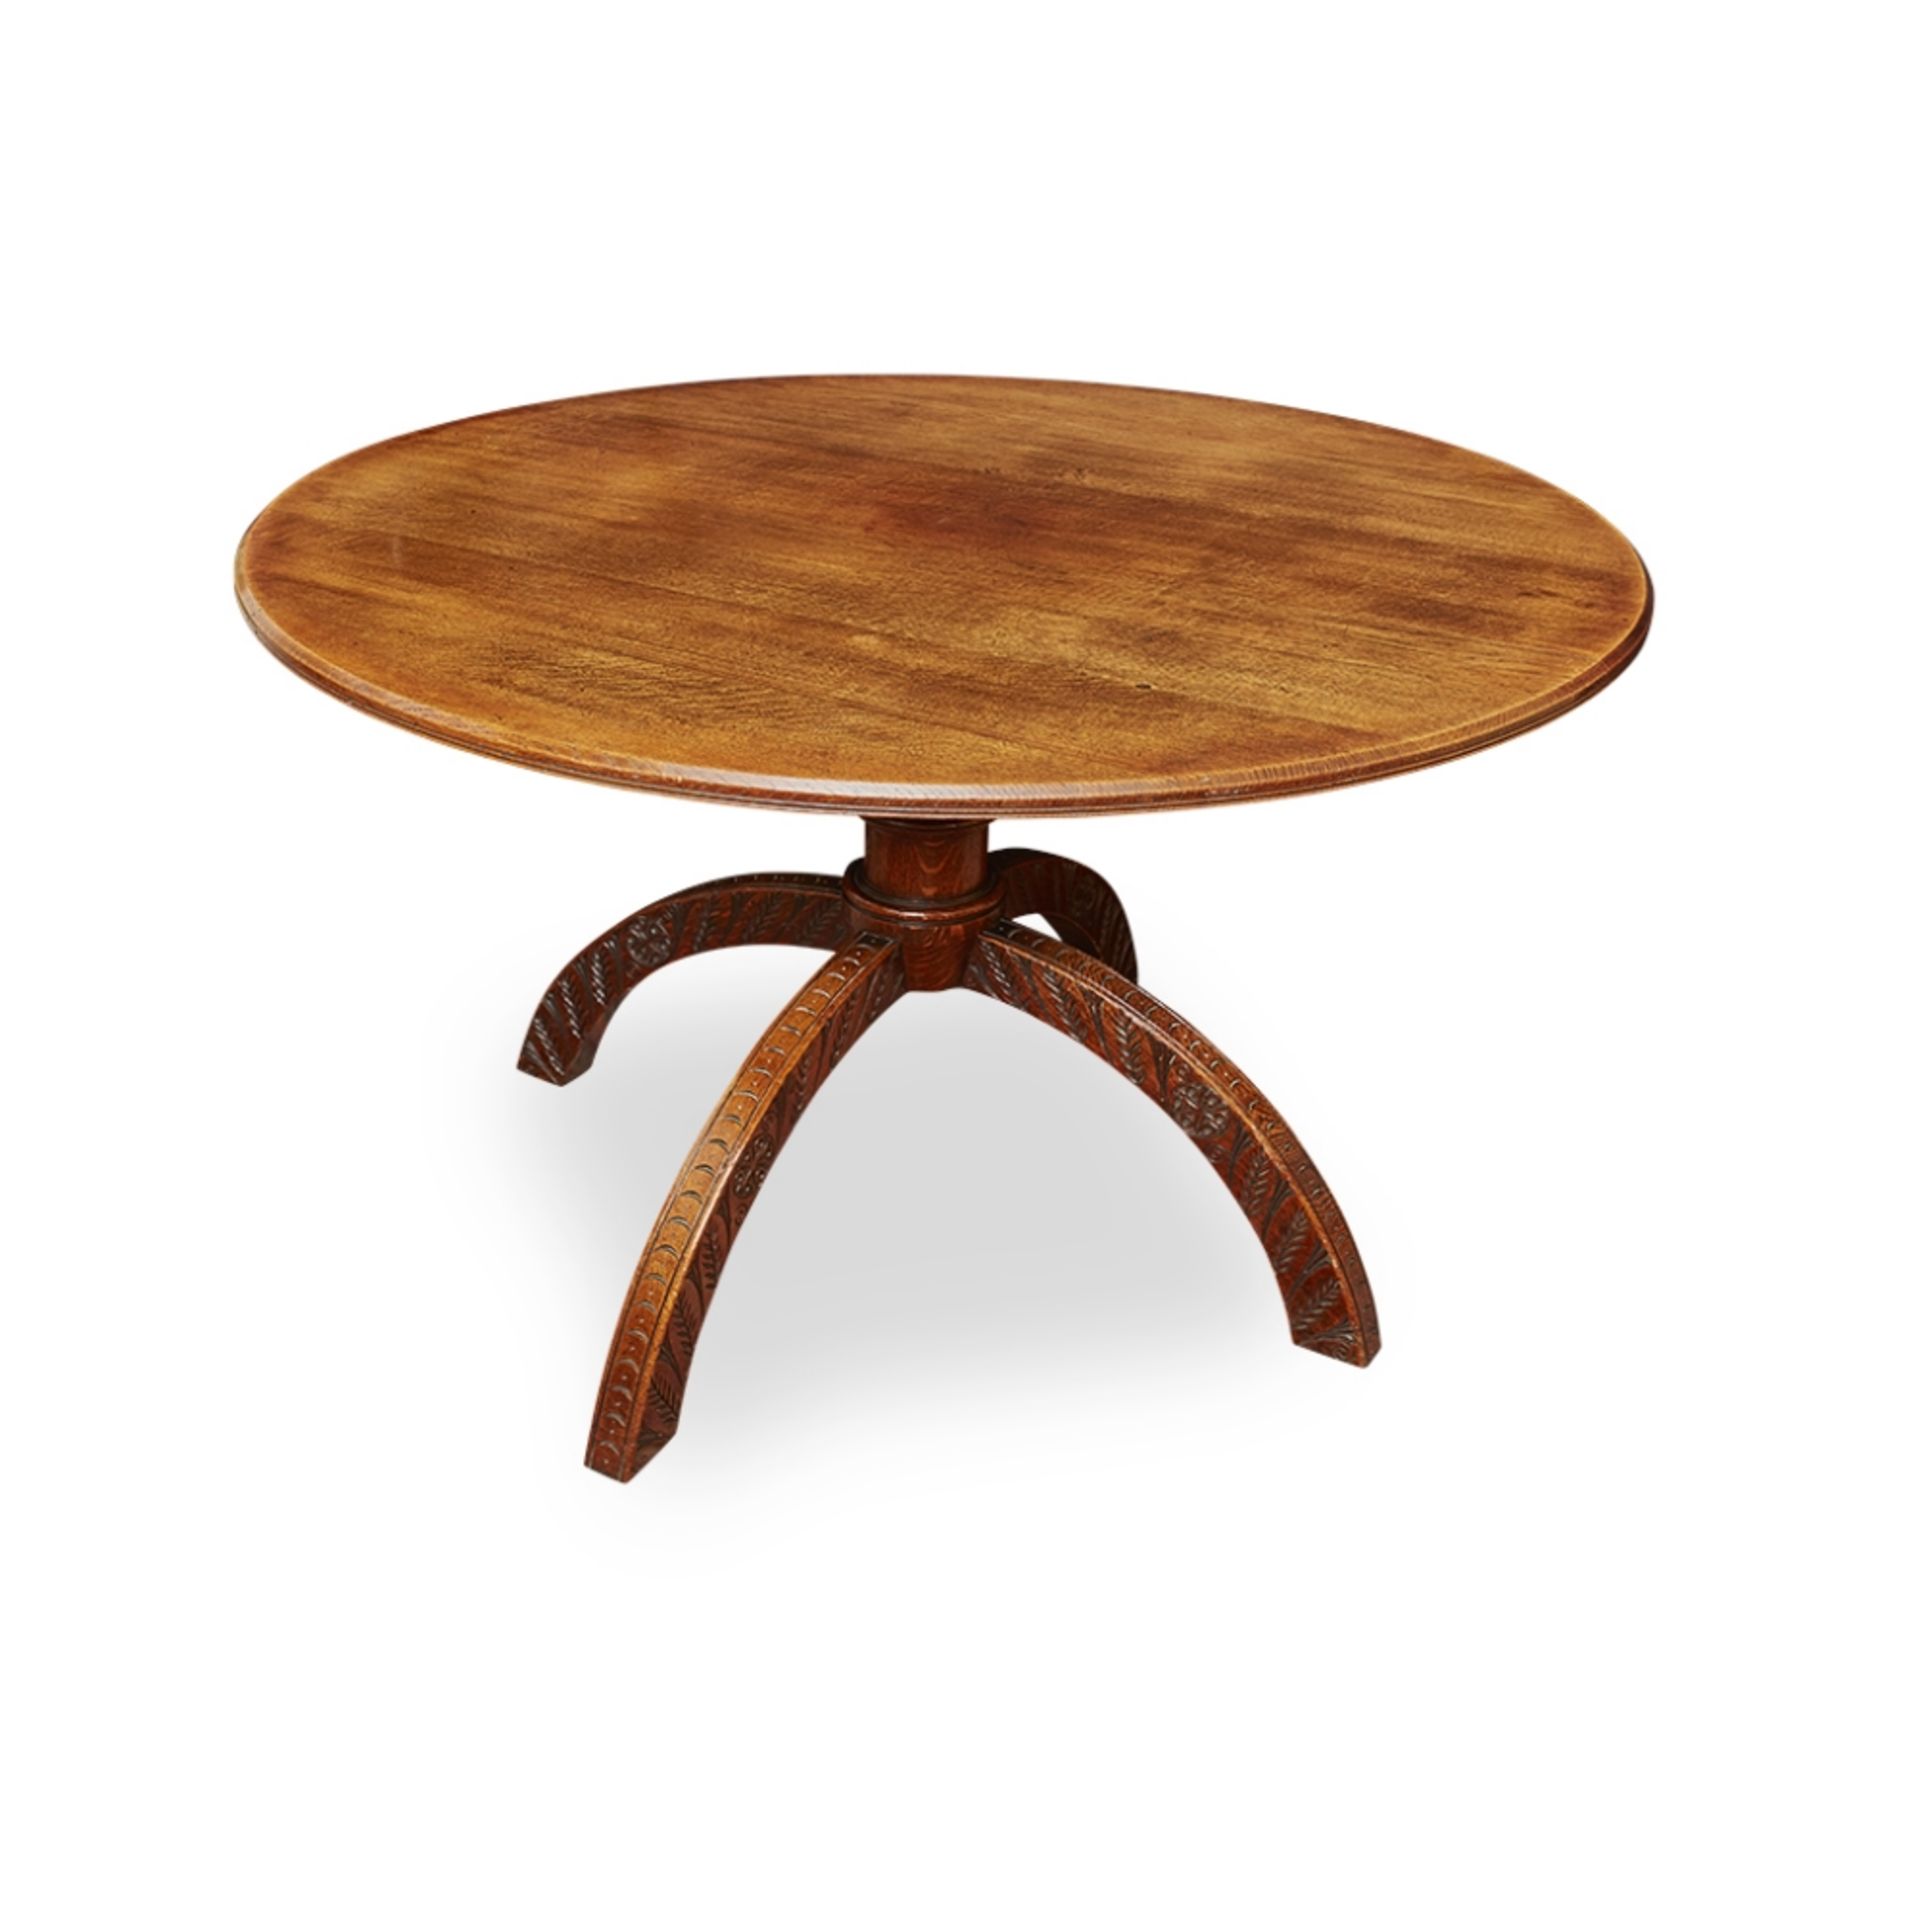 MANNER OF THOMAS JECKYLL VICTORIAN GOTHIC REVIVAL OAK CENTRE TABLE, CIRCA 1870 the moulded - Image 2 of 4